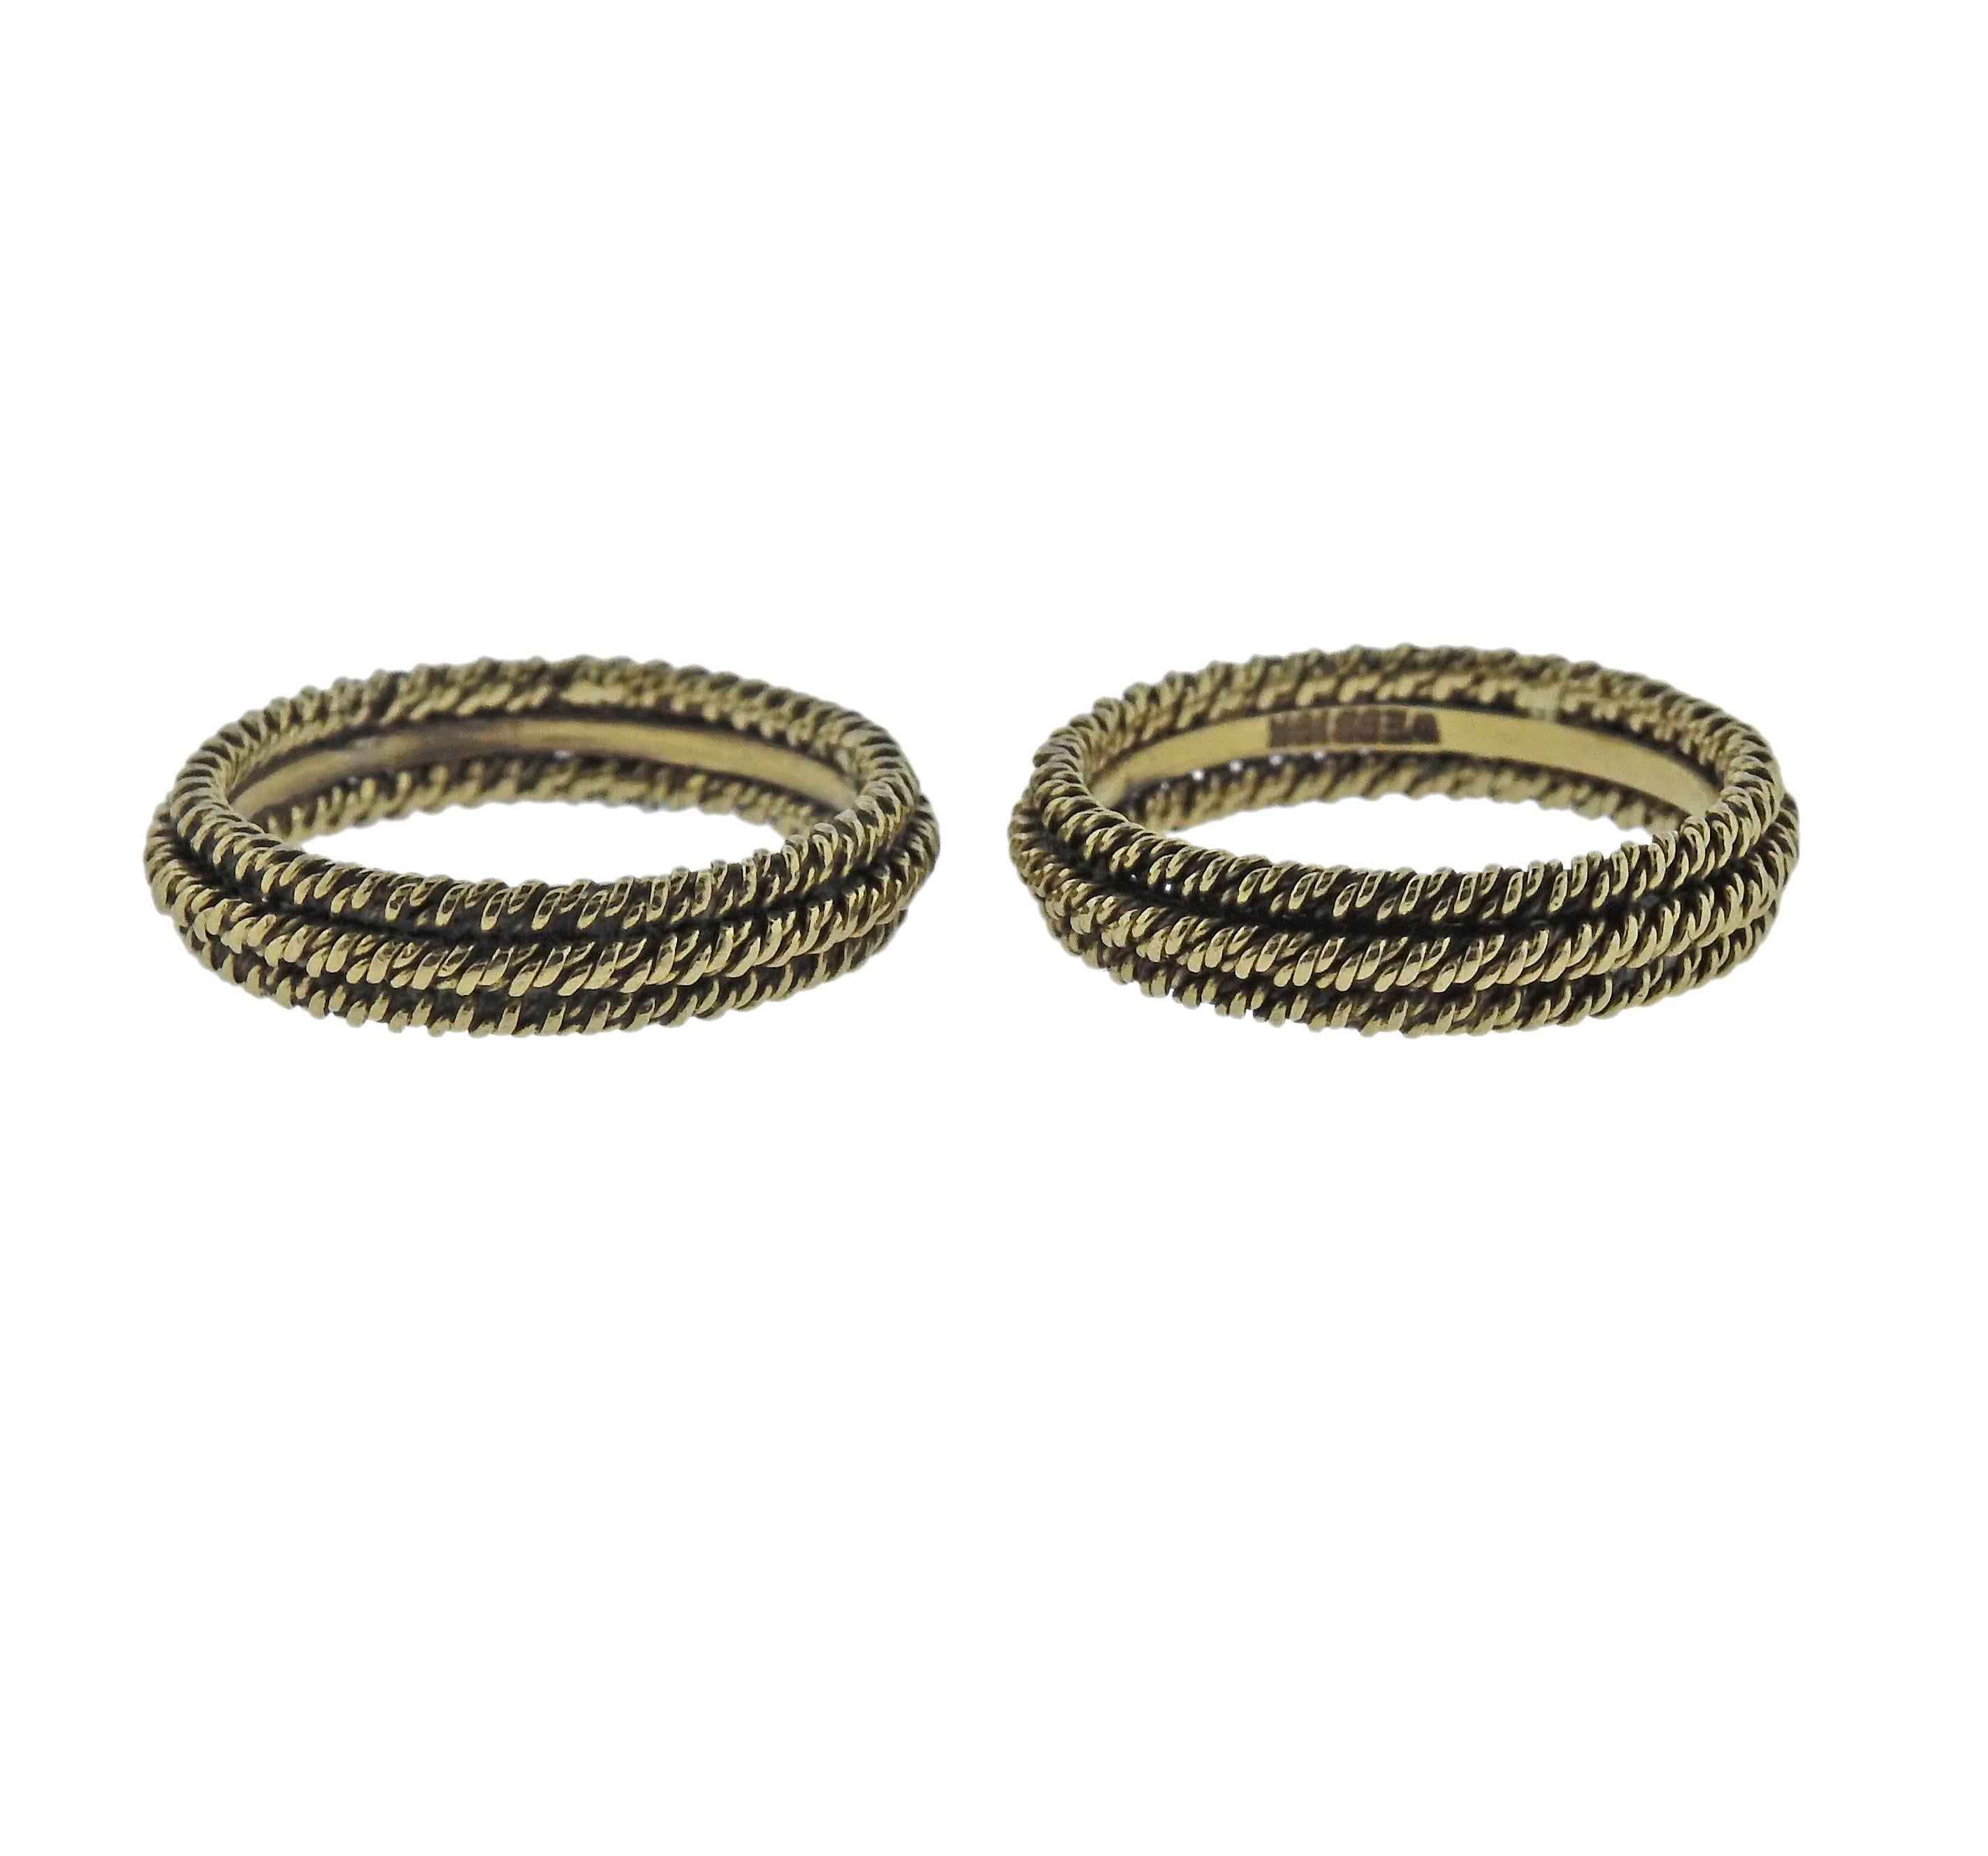 A pair of two 18k gold ring guards crafted by David Webb. Each ring size 7, each is 4.6mm wide, total weight is 8.7 grams. 